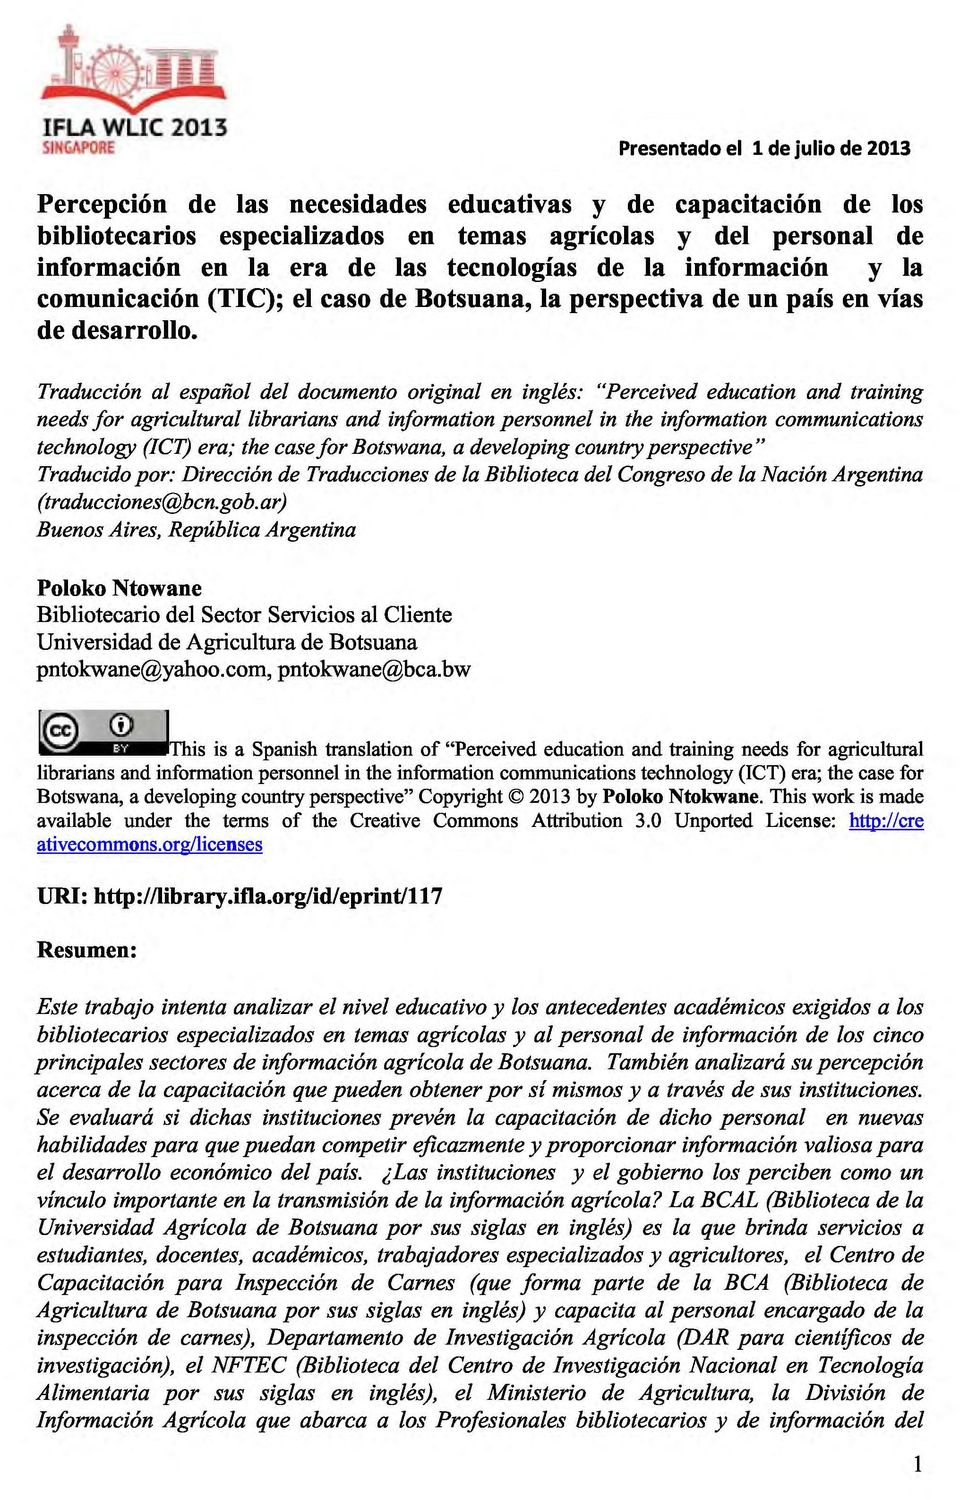 Trducción l espñol del documento originl en inglés: Perceived eduction nd trining needs for griculturl librrins nd informtion personnel in the informtion communictions technology (ICT) er; the cse